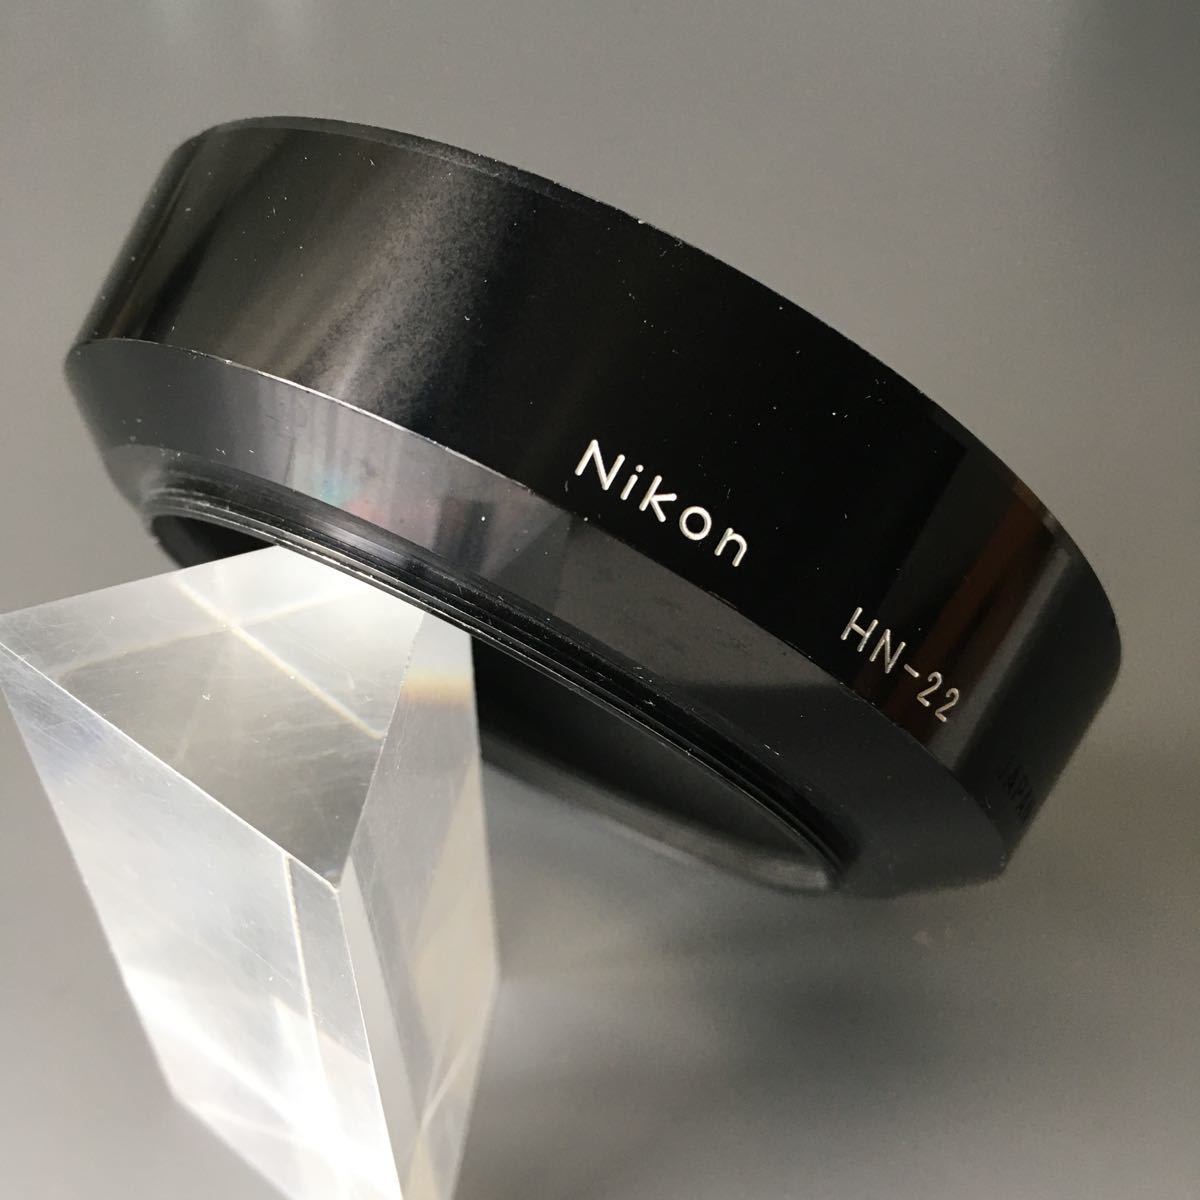 ［Nikon HN-22］ニコン メタルレンズフード HN-22 （Ai-S 35-70mm・Ai-S 35-135mm・AF 60mm F2.8 D  Micro ）中古実用品【送料無料】